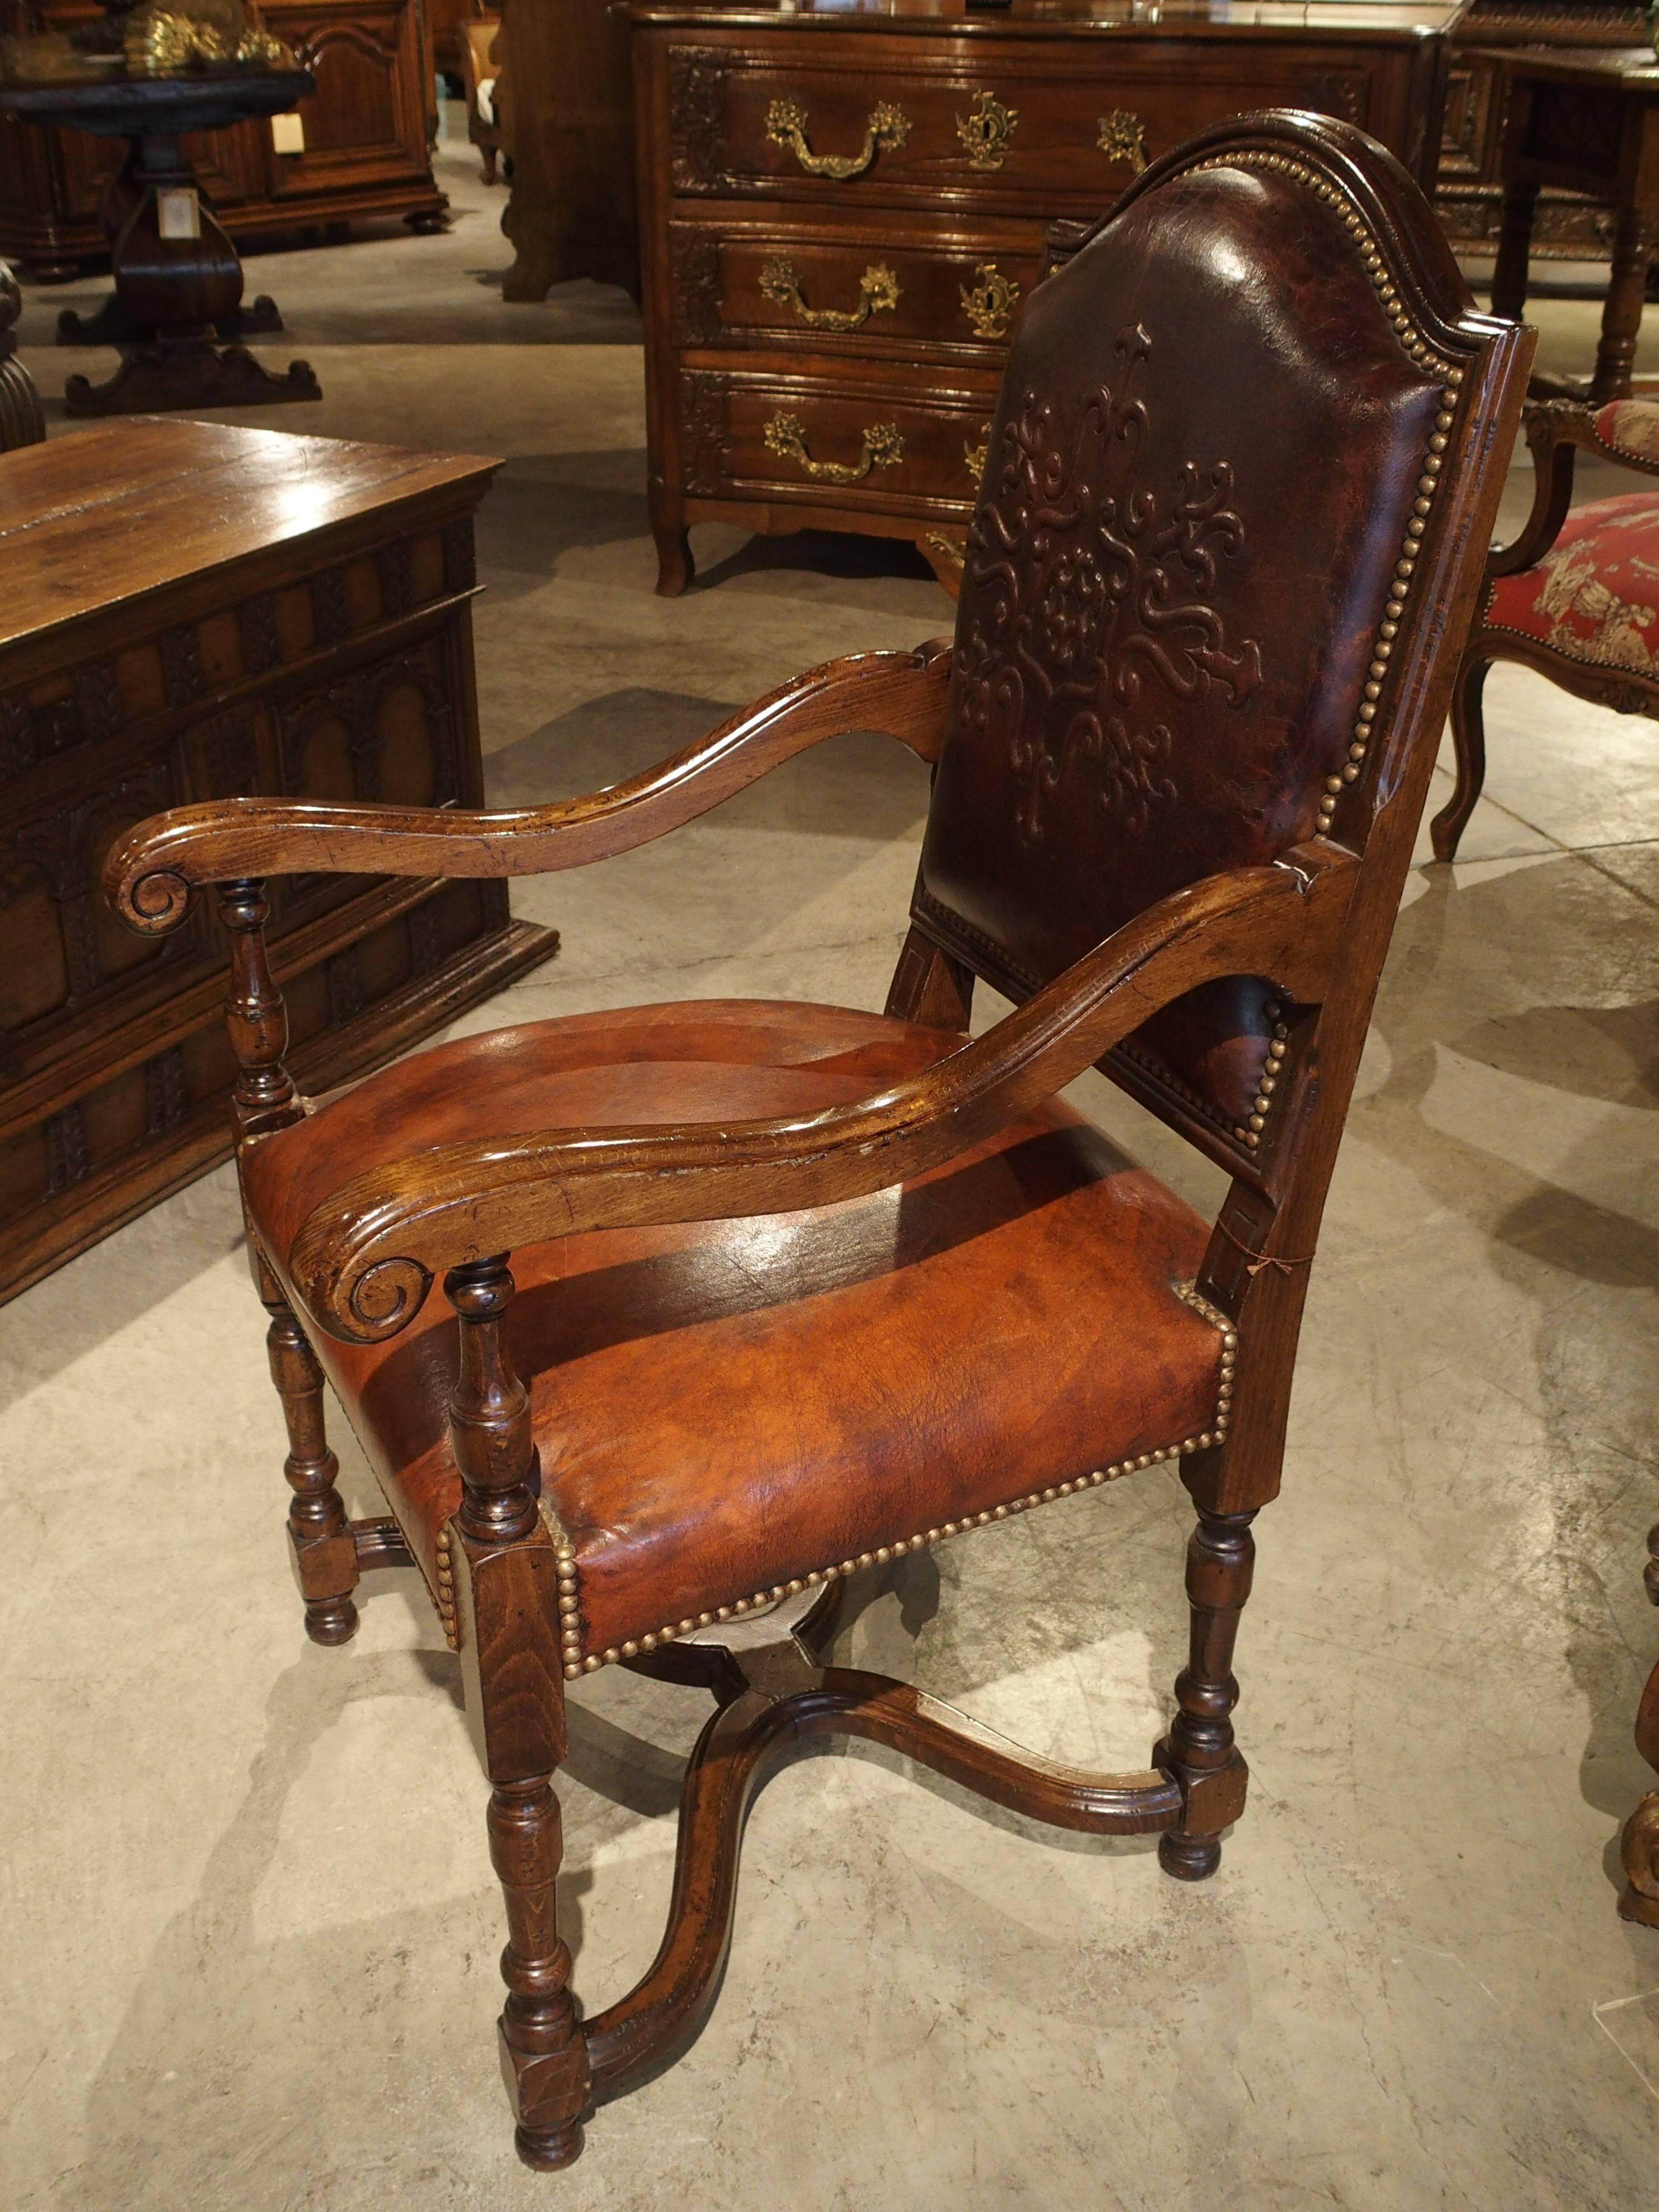 This is a handmade leather armchair from the South of France. The frame is constructed of French walnut and the leather is attached by hundreds of brass nailheads. This is a custom design made for our store, and it is one of the last available. It